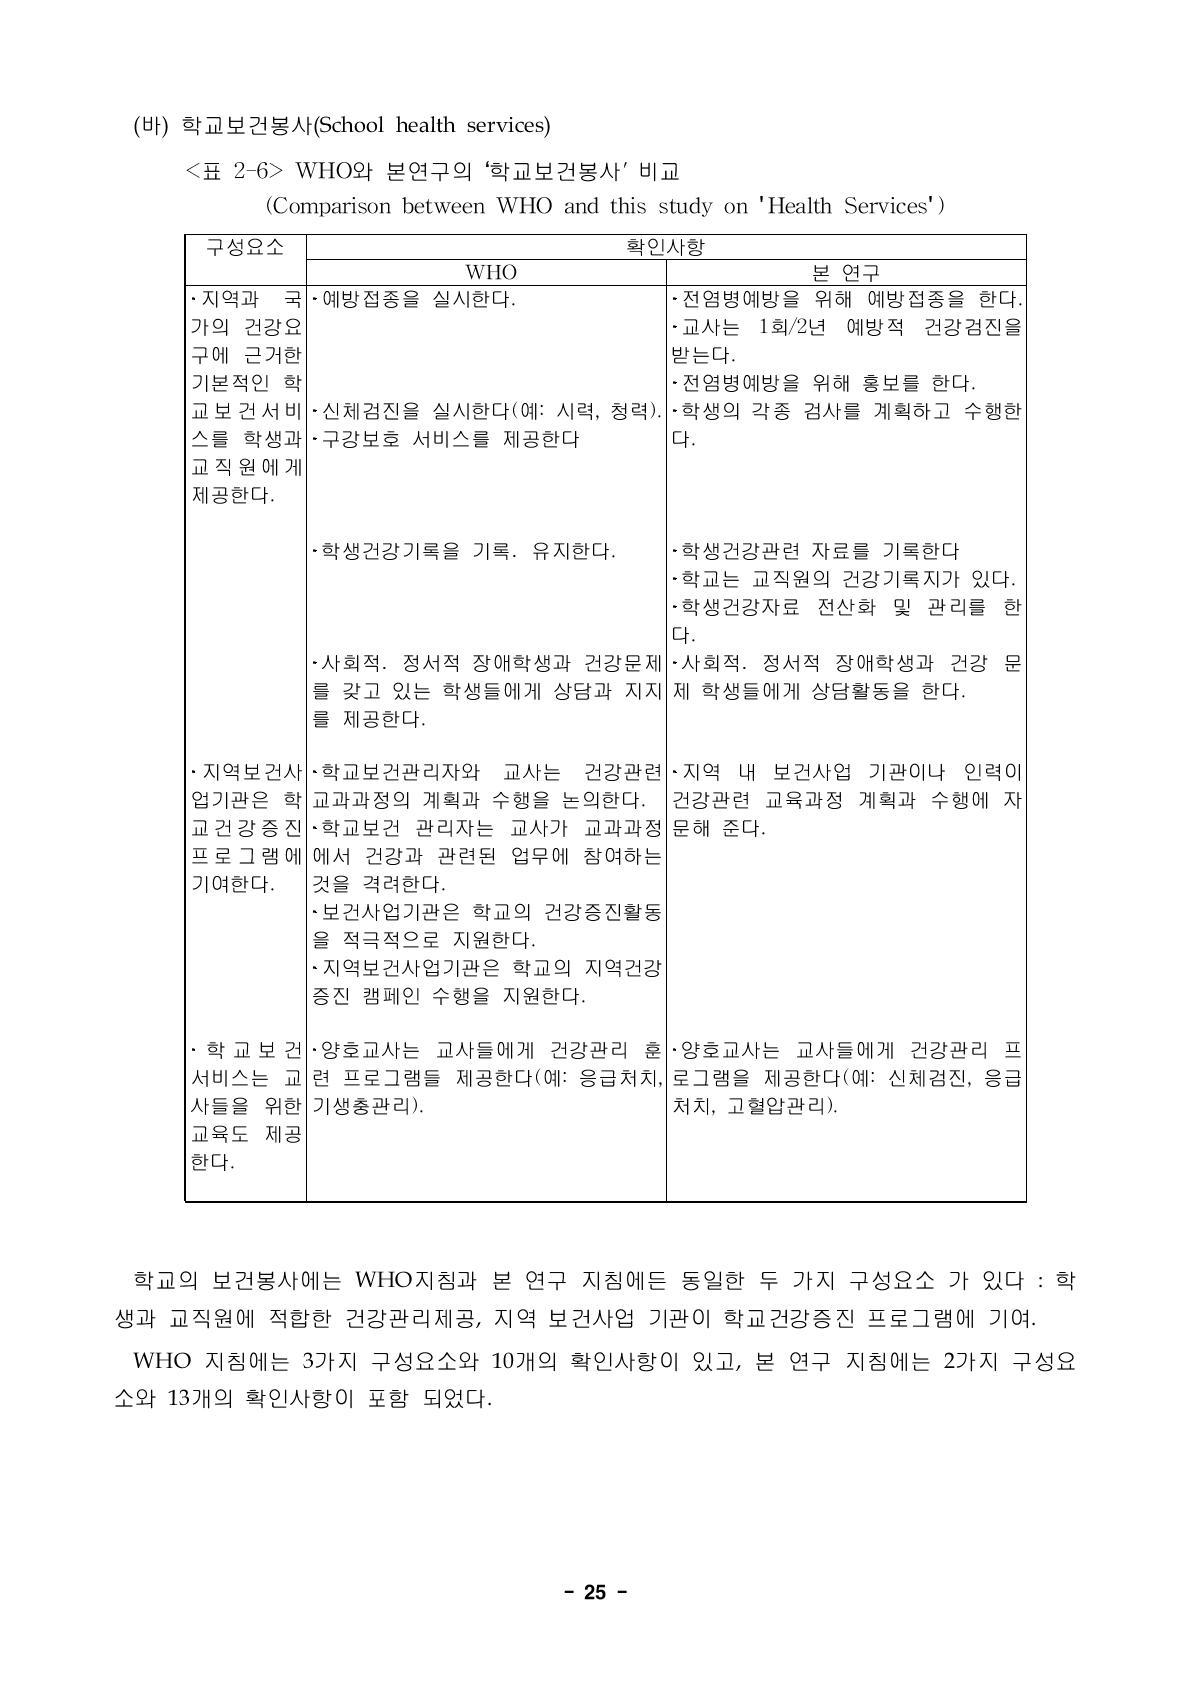 WHO와 본연구의 ‘학교보건봉사’ 비교 (Comparison between WHO and this study on 'Health Services')